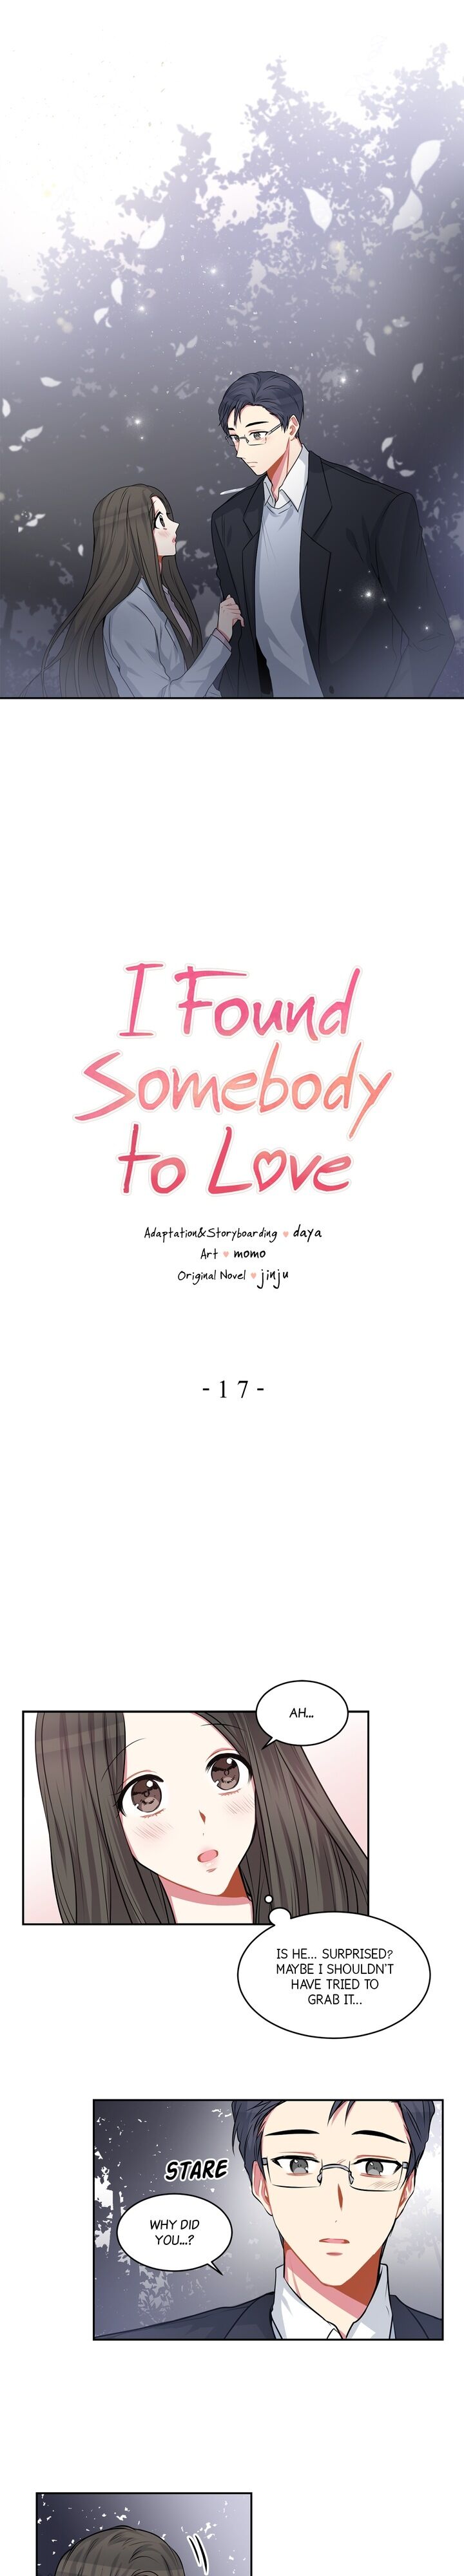 I Found Somebody To Love - Page 3